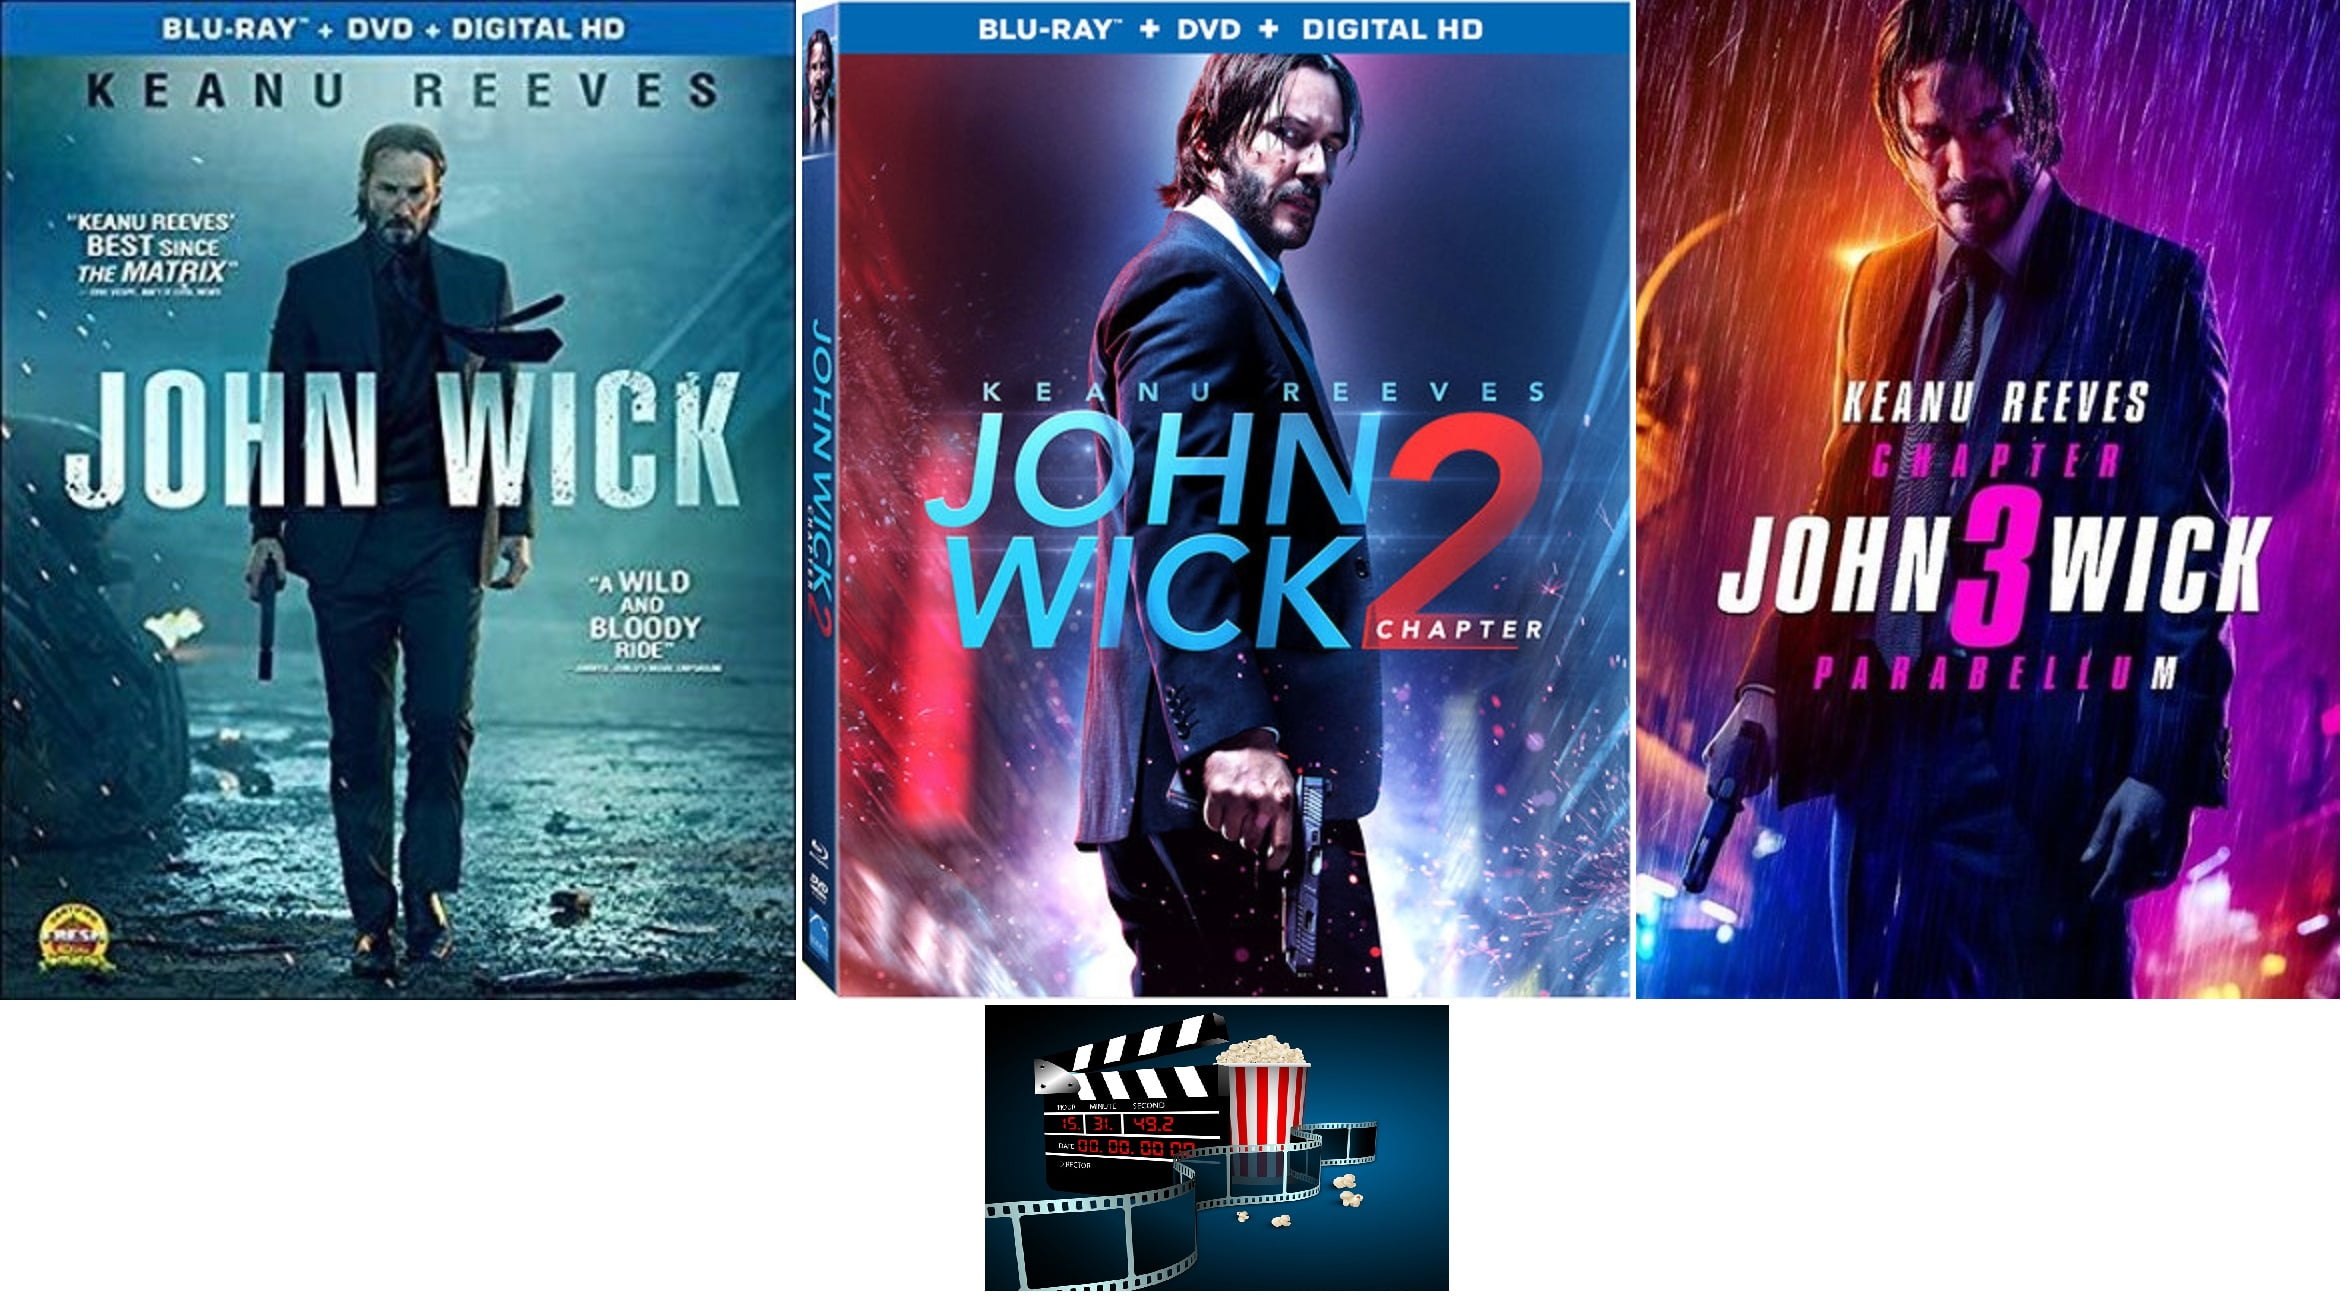 JOHN WICK, Starring Keanu Reeves, Hits Digital Jan 13 and Blu-ray Feb 3.  Here Are Box Art And Product Details